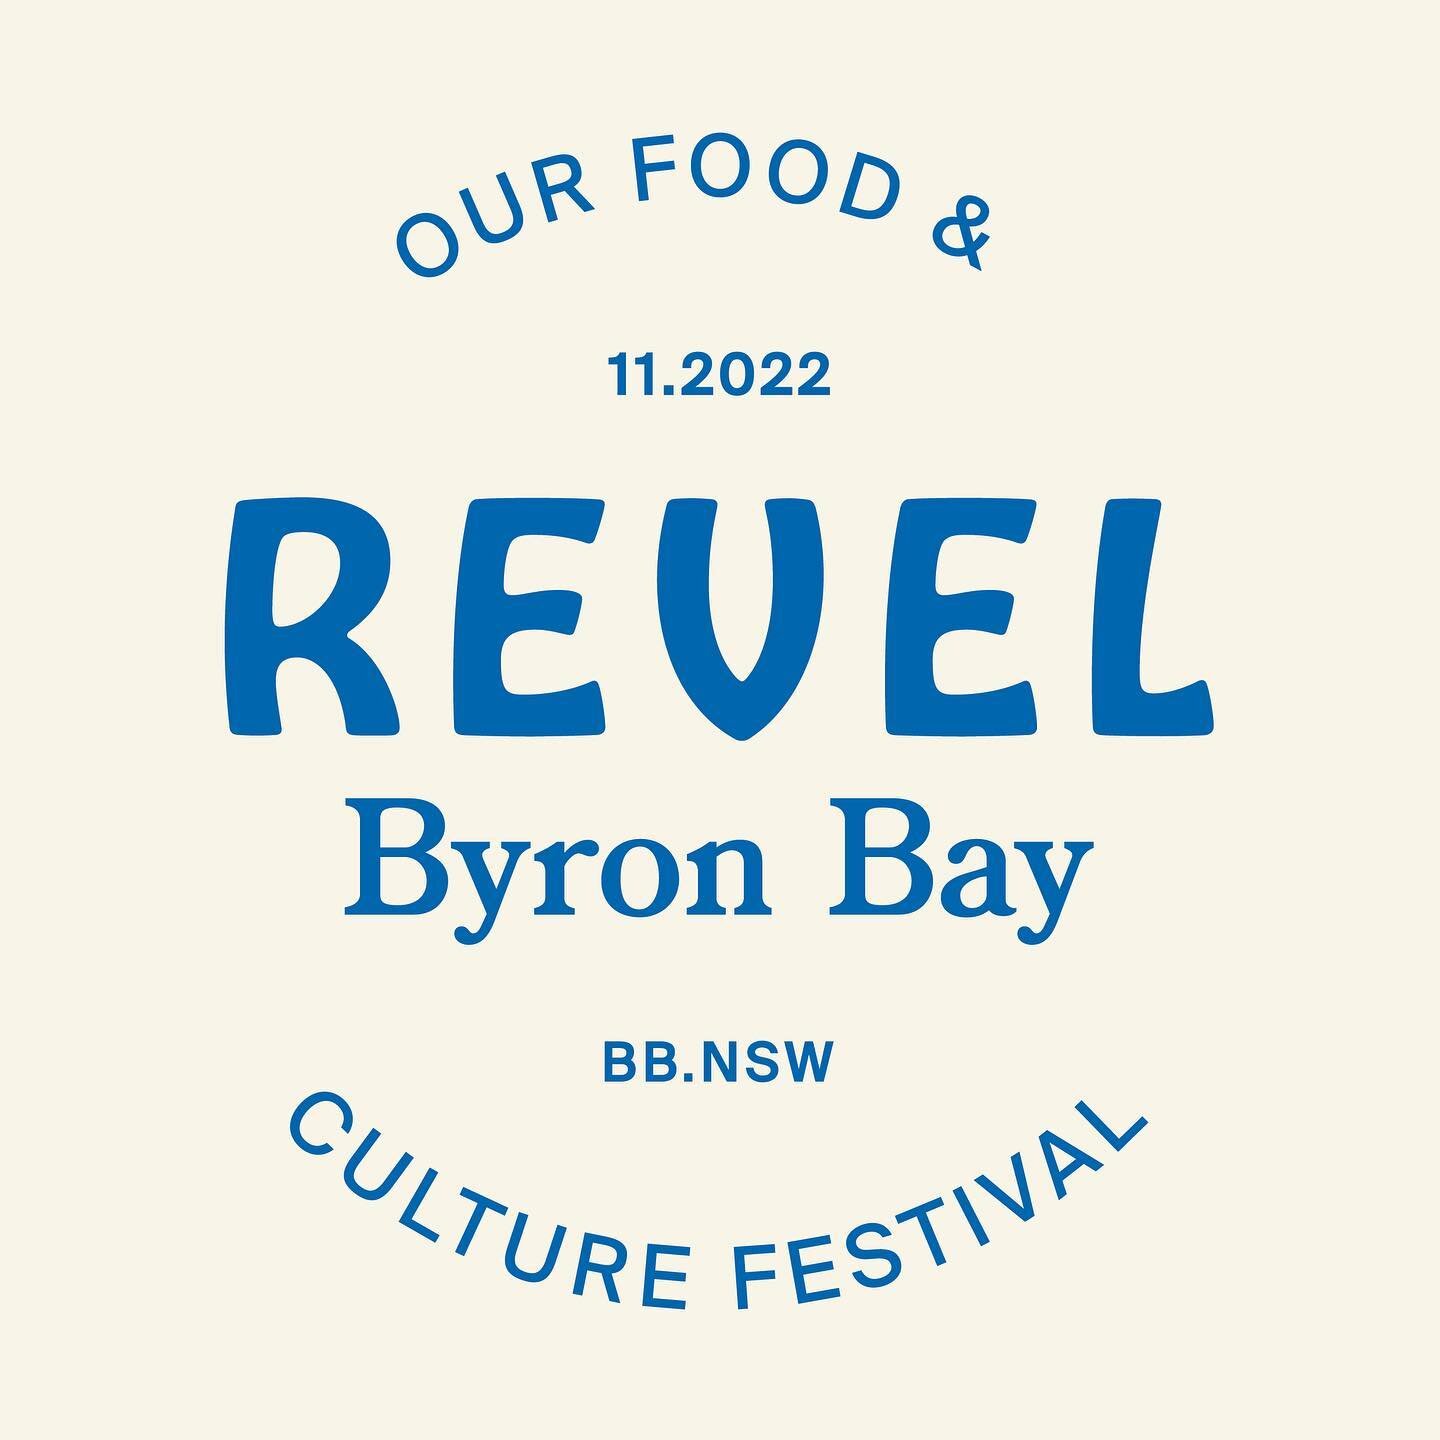 FESTIVAL LAUNCH!
Revel Byron Bay: Our Food &amp; Culture Festival
10-13 November 2022
@revelbyronbay 

It is such an honor to be working with the incredible Revel Team to develop the branding for a festival that celebrates our very own incredible com